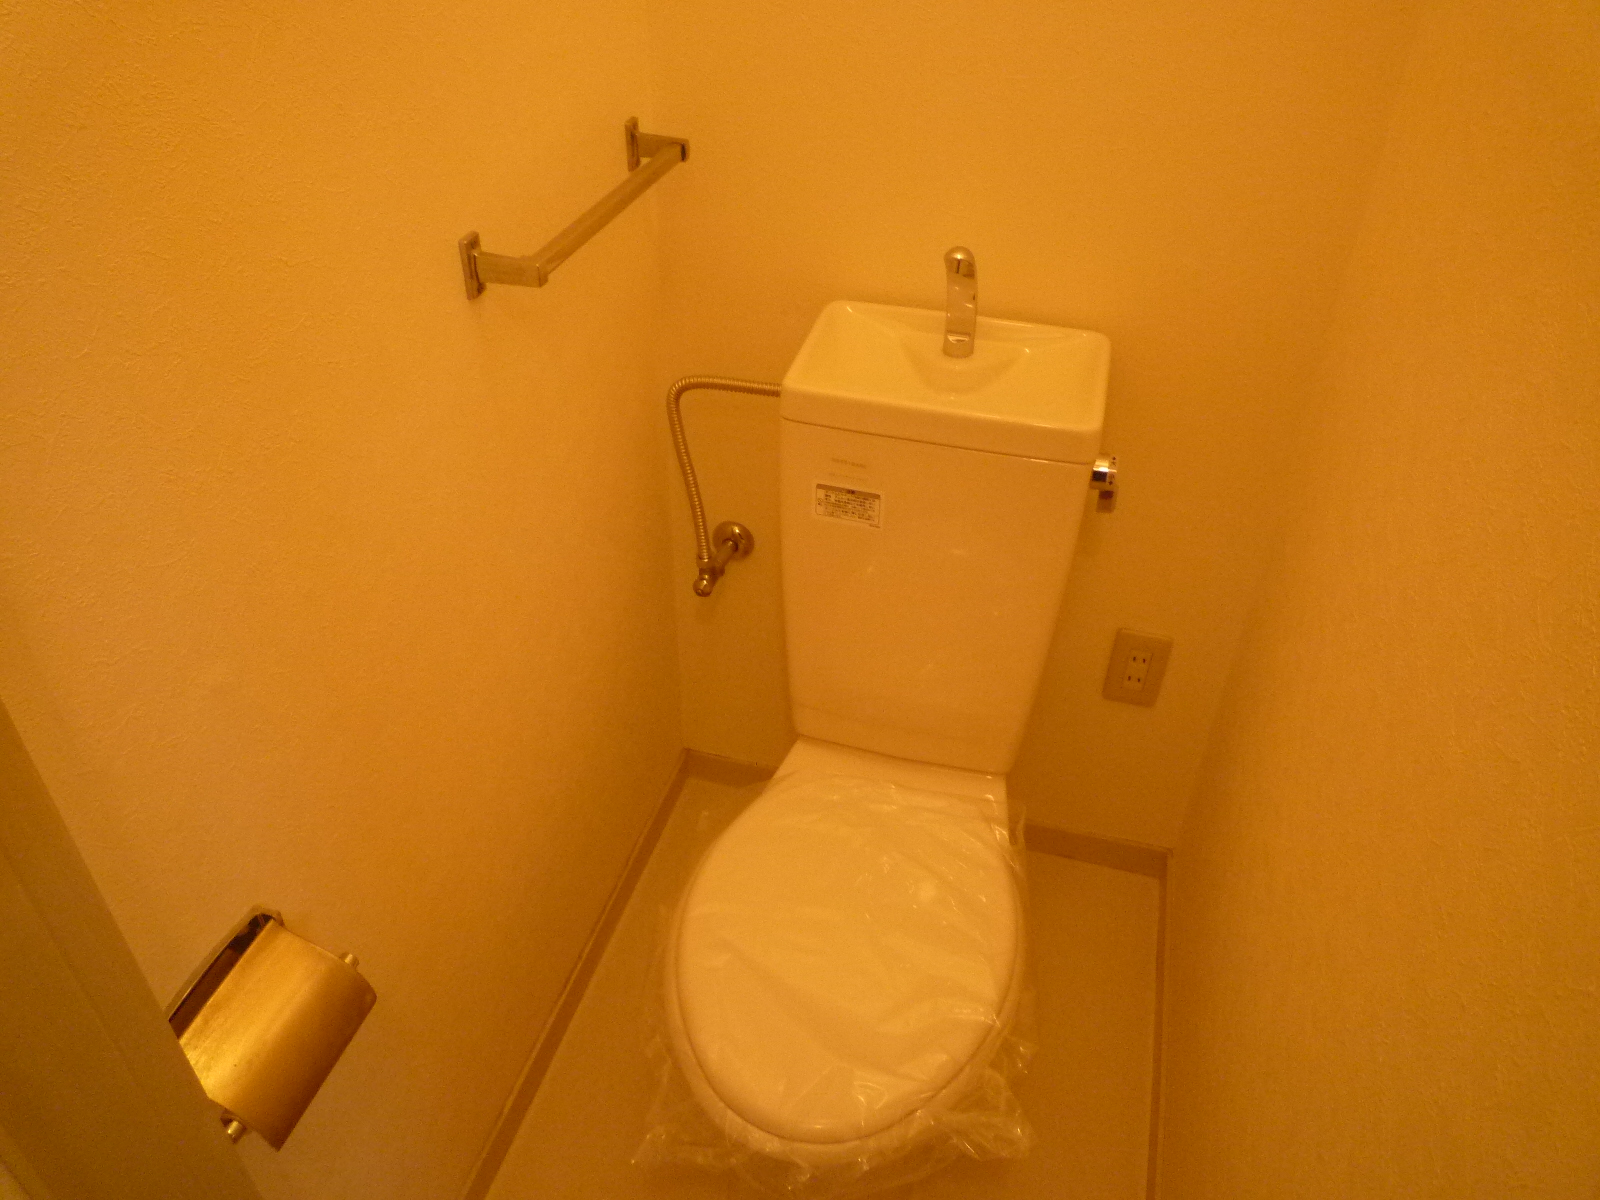 Toilet. It comes with outlet